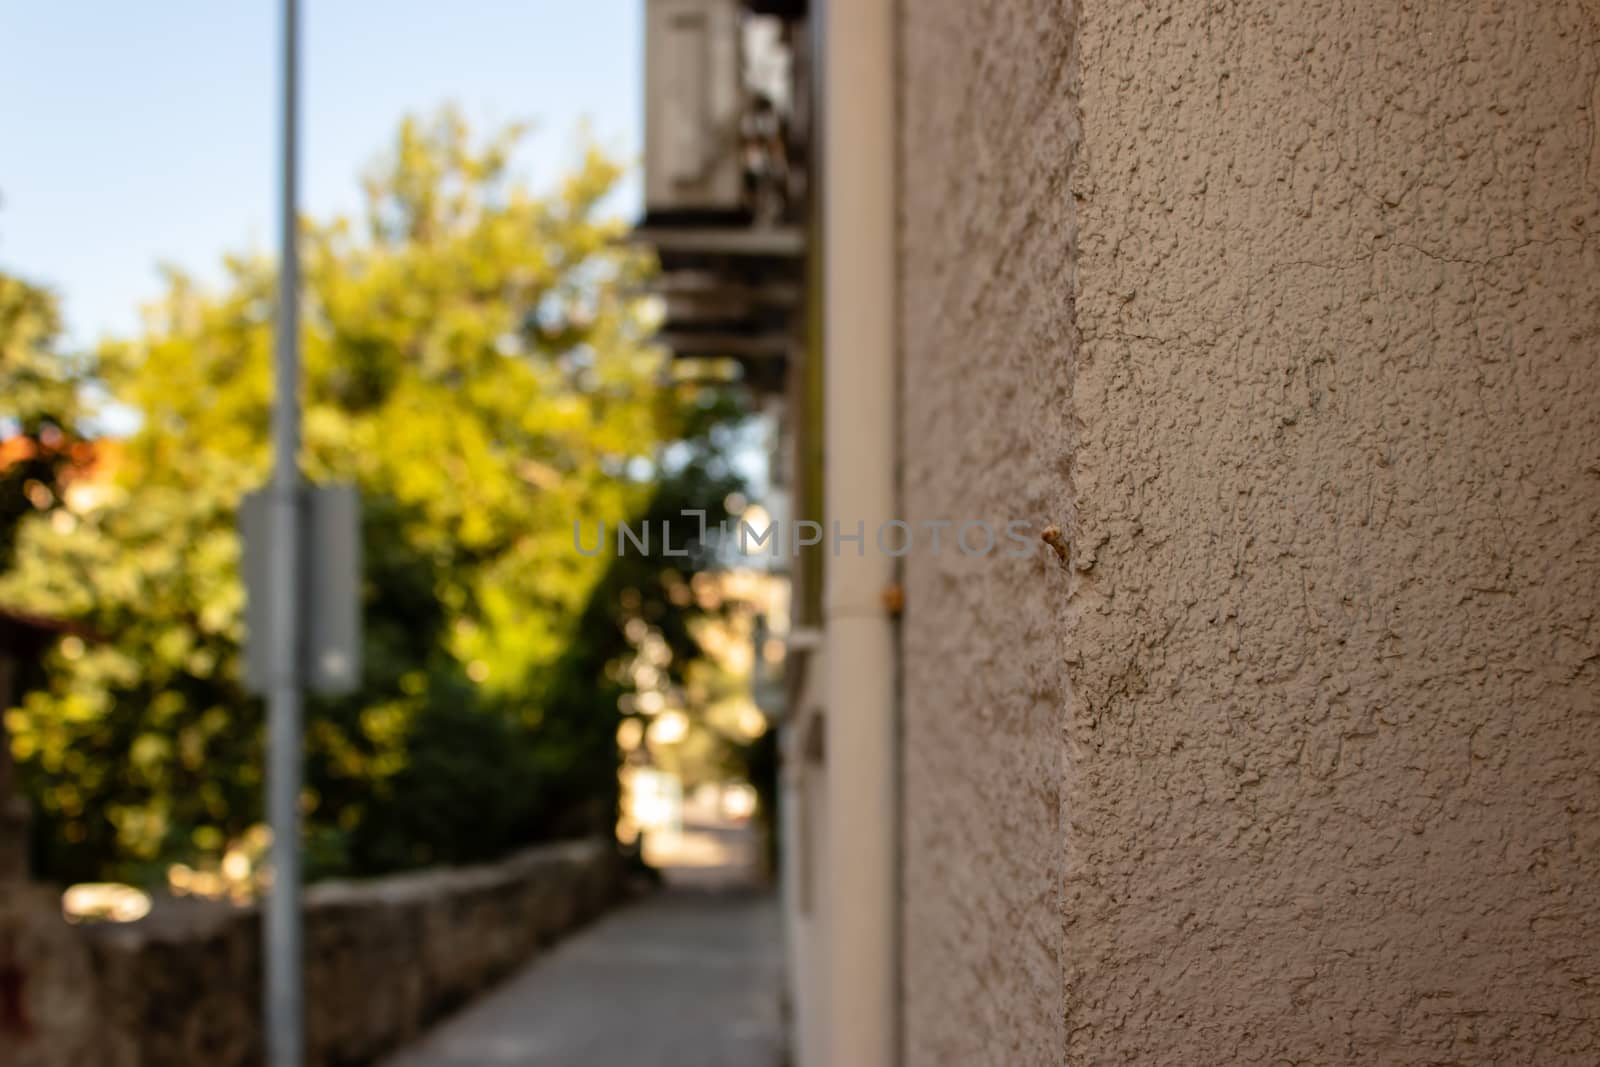 a close edge shoot from an old building - background is blurry. photo has taken at izmir/turkey.